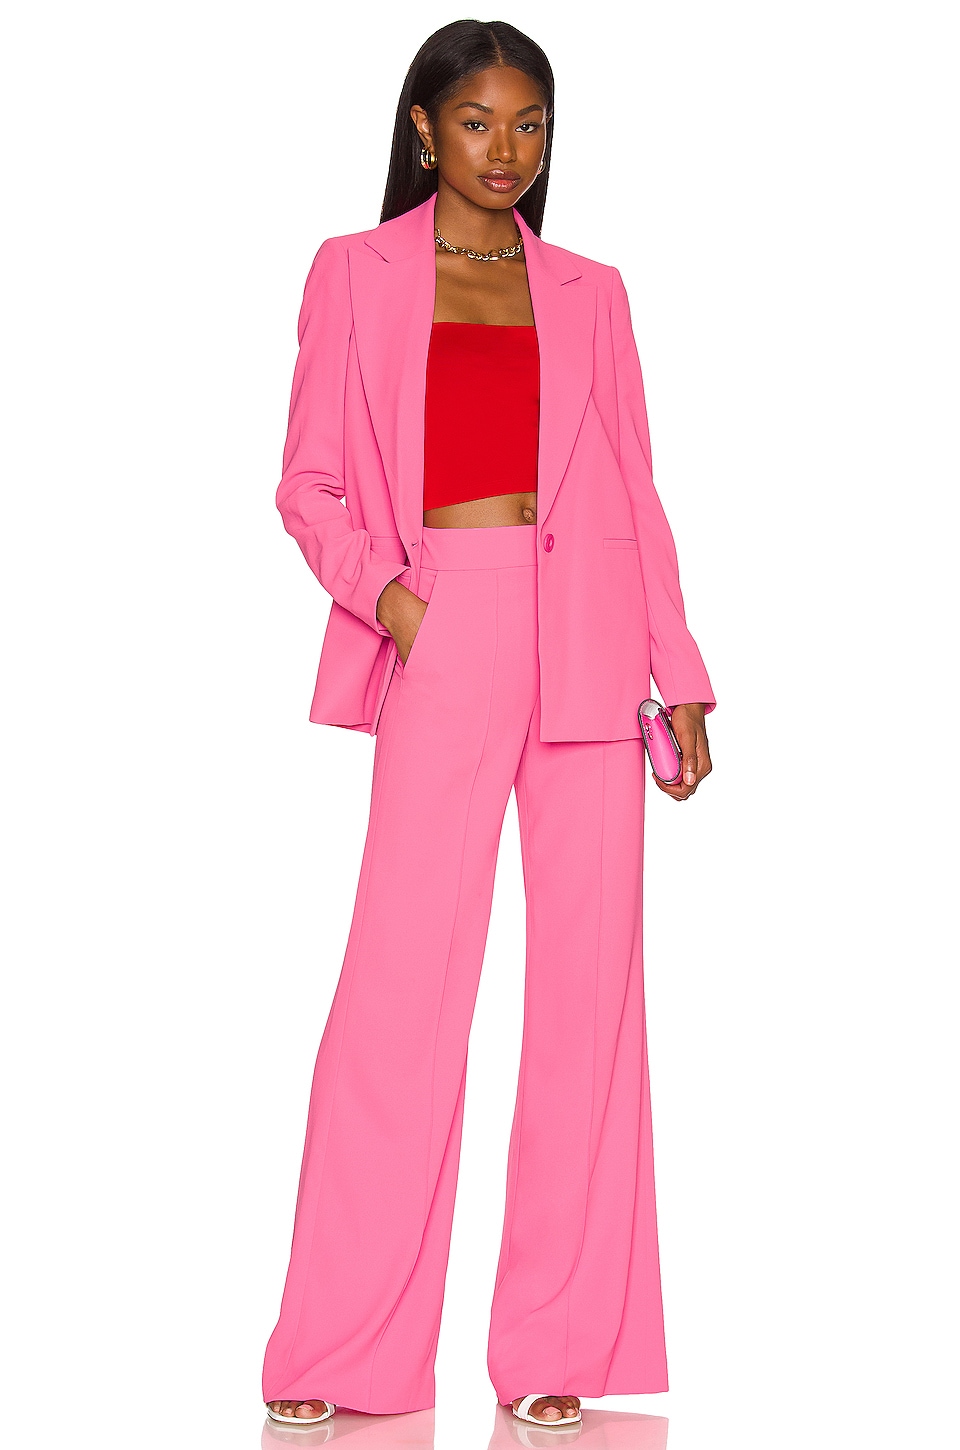 20 Pantsuits for Women in 2021  Where To Buy and Price of Pant Suit